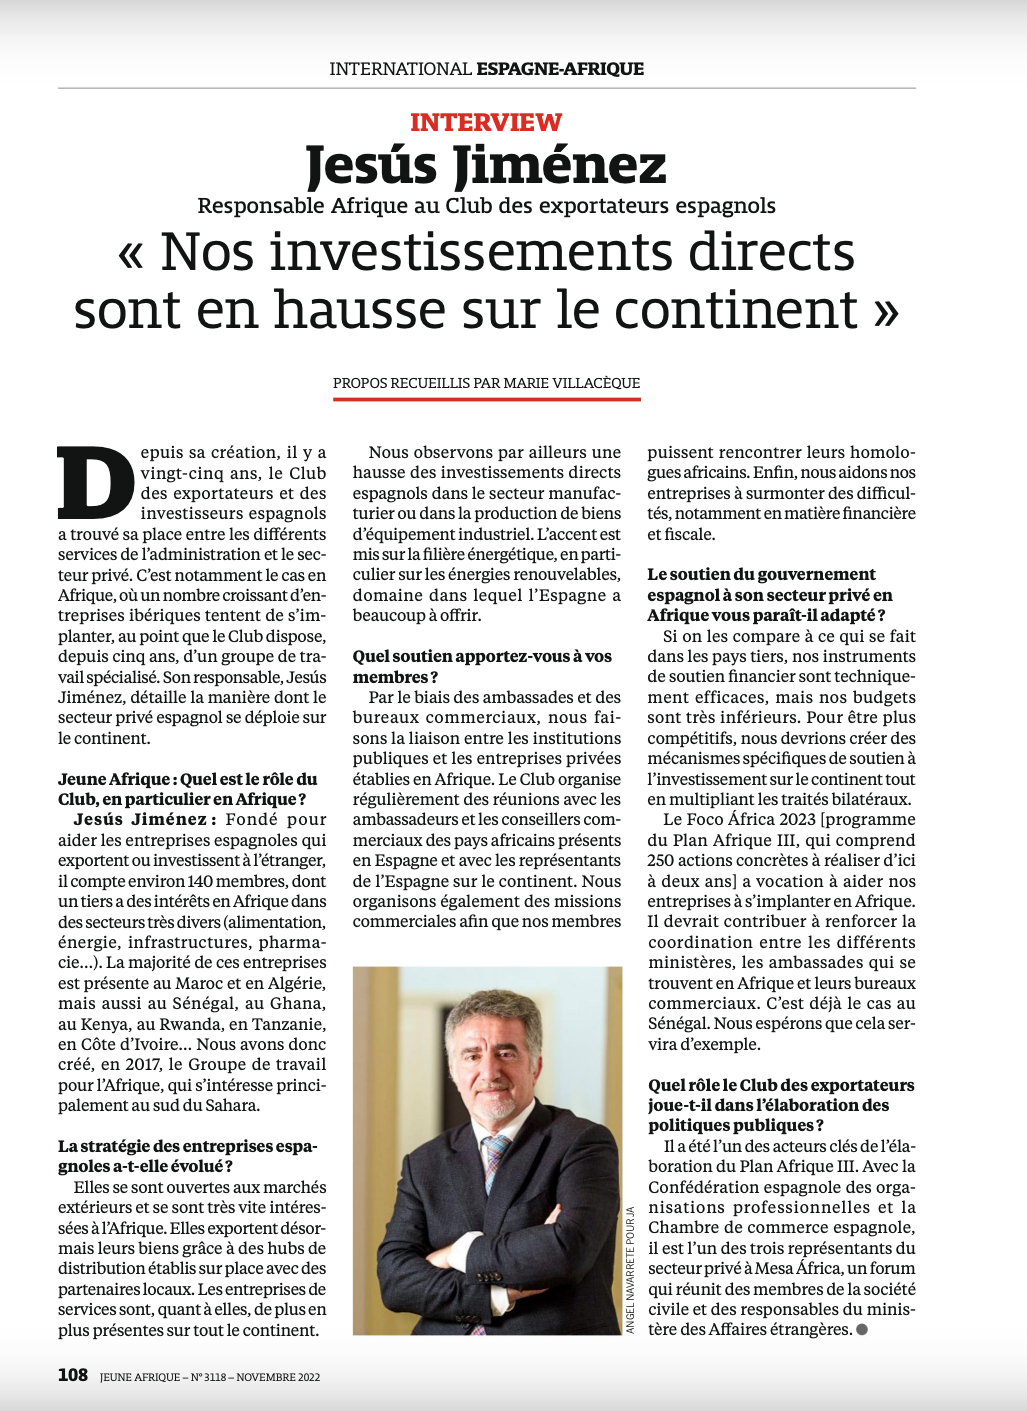 Jesús Jiménez, CEO of FOCE, for Le Jeune Afrique: ´Specific mechanisms should be created to support foreign investment in Africa and bilateral treaties should be multiplied´.